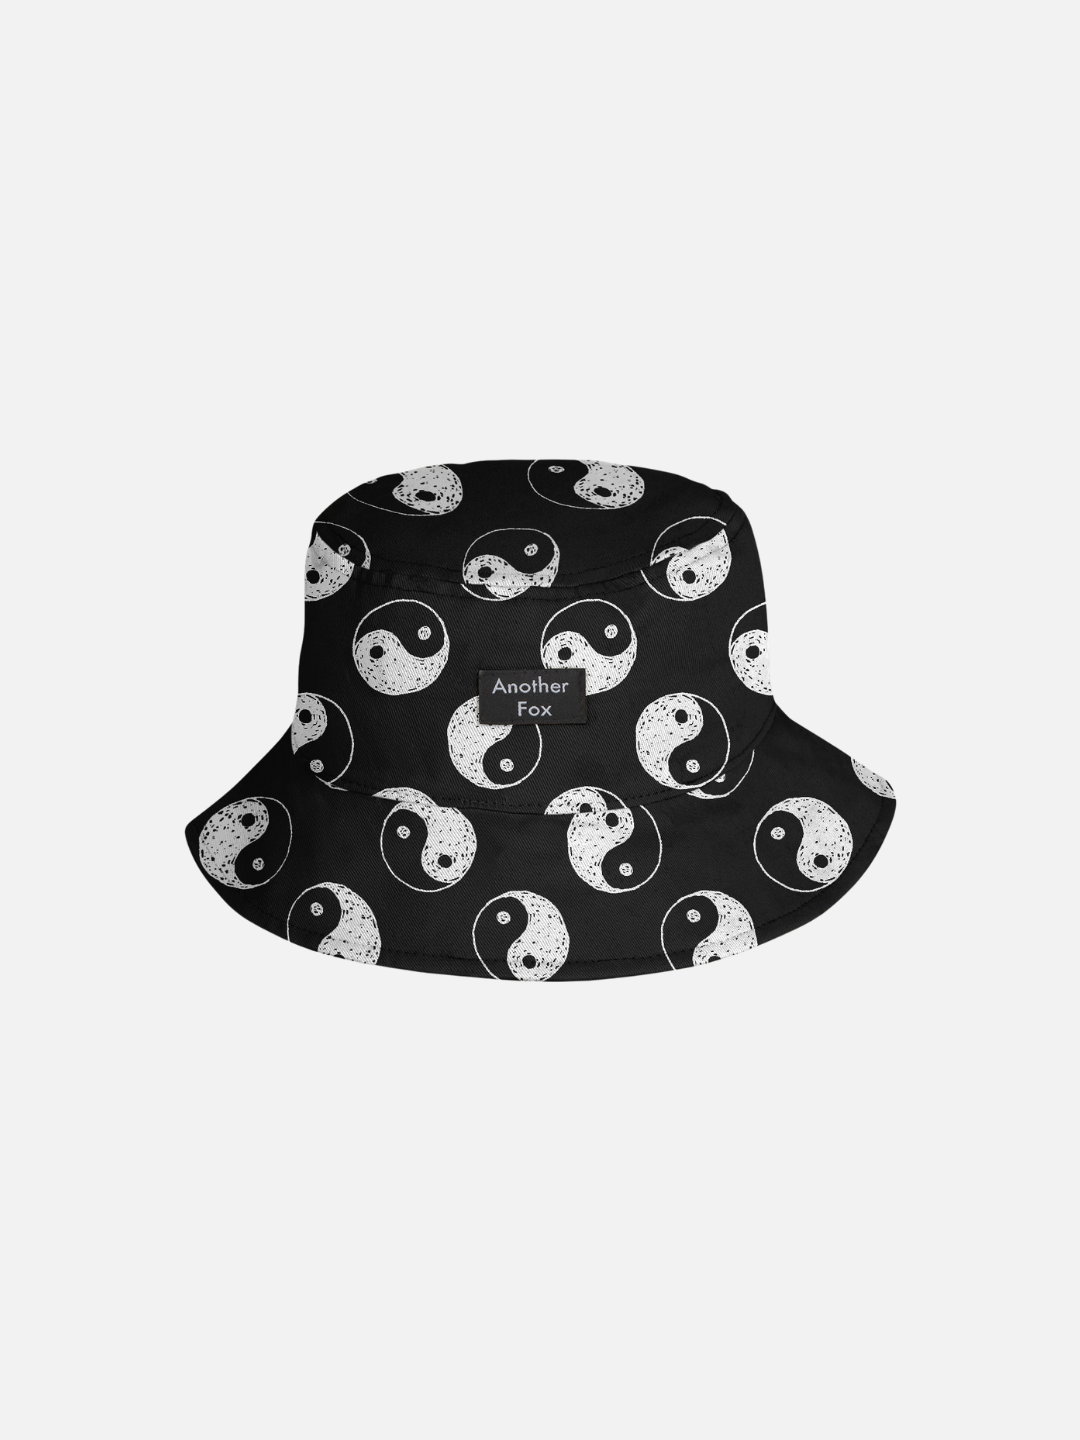 A front view of the black cotton bucket hat with a yin and yang pattern all over.